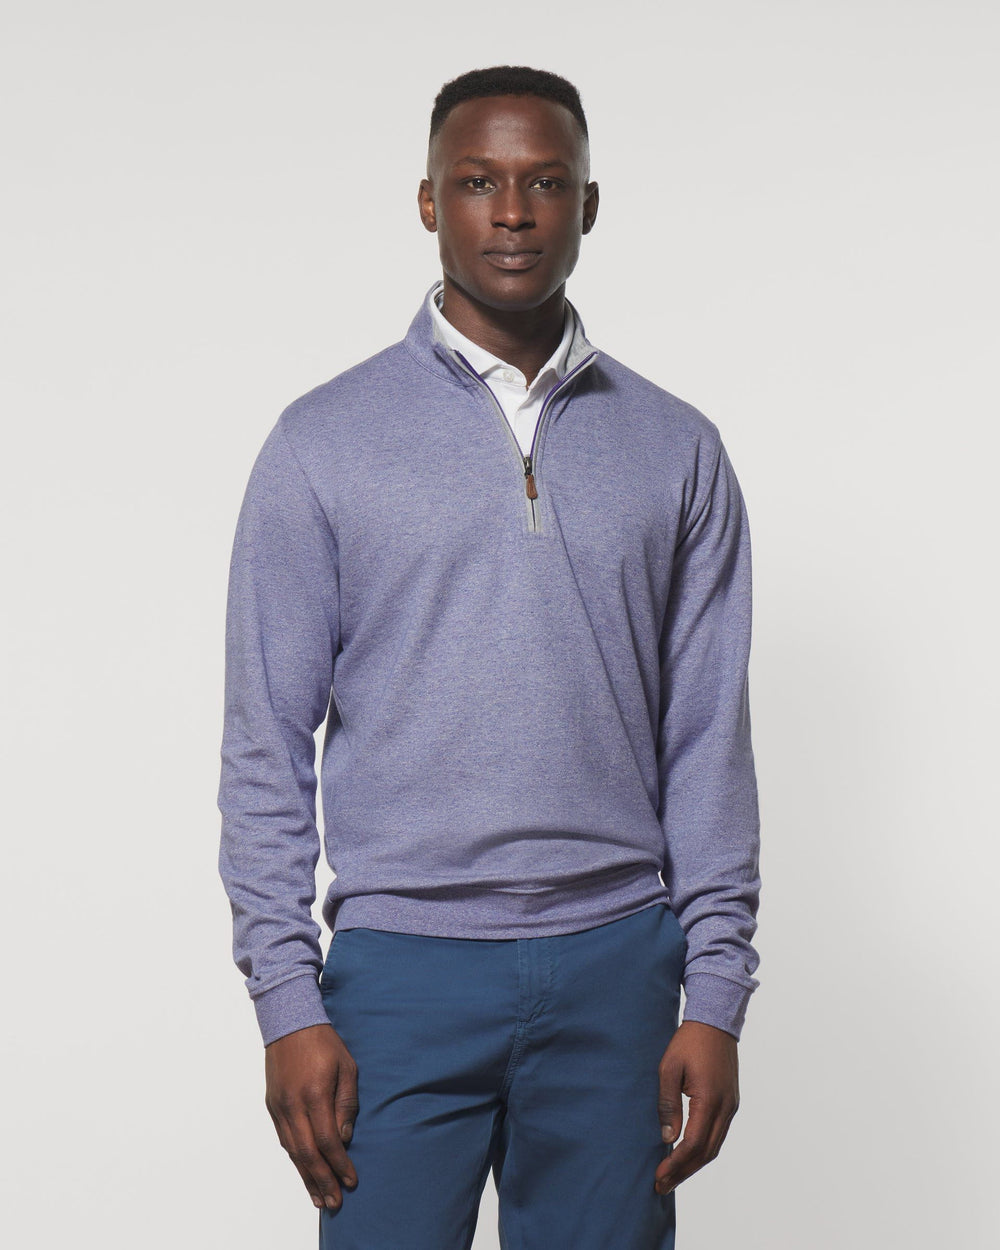 SULLY 1/4 SWEATER (MULBERRY) - JOHNNIE-O